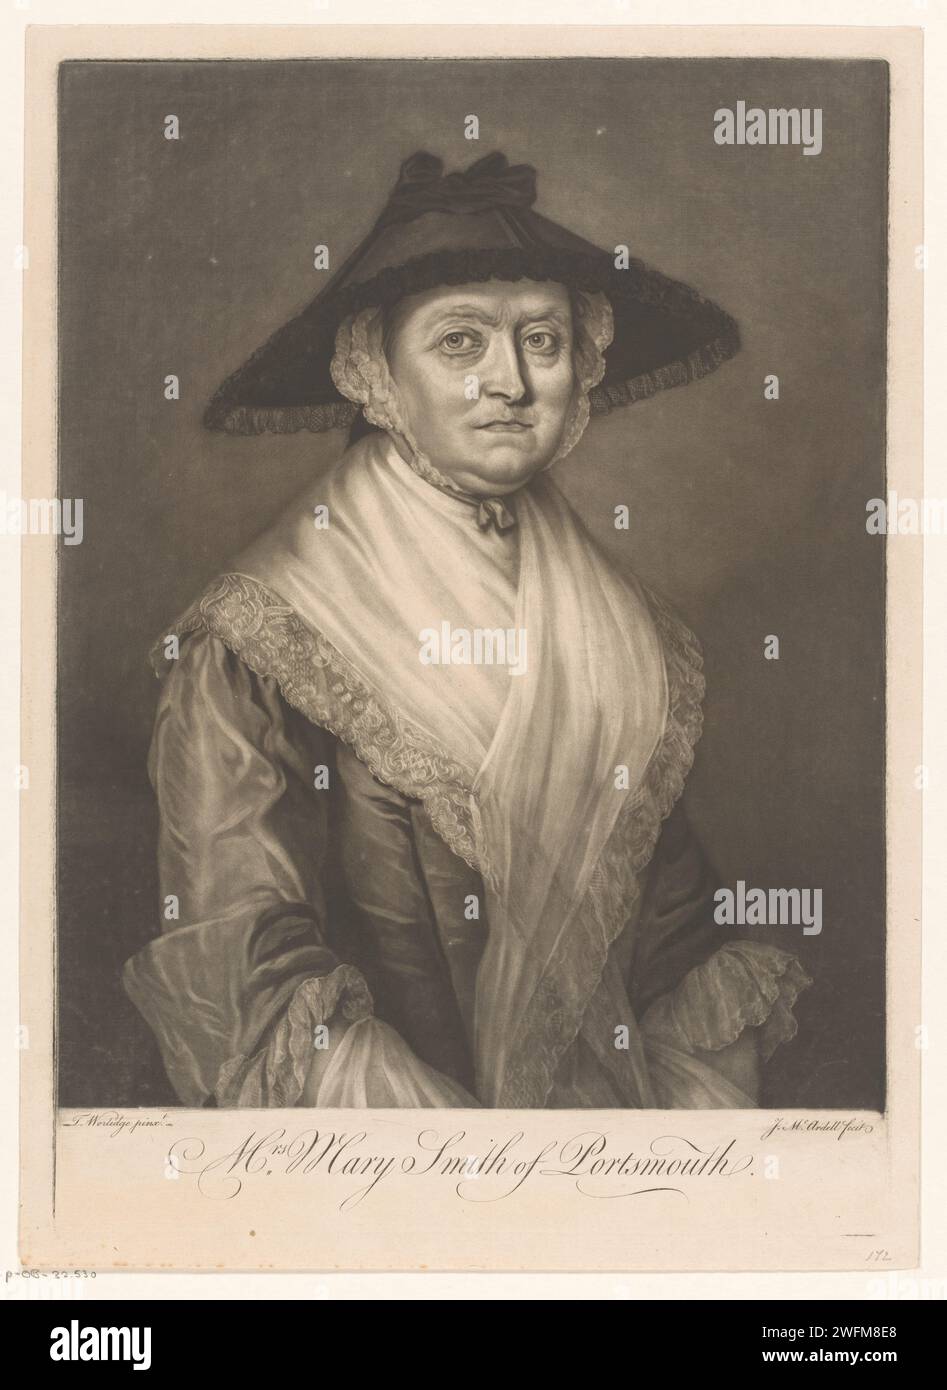 Portret van Mary Smith, James McArdell, after Thomas Worlidge, c. 1755 print  London paper  historical person (with NAME) - BB - woman - historical person (with NAME) portrayed alone Stock Photo